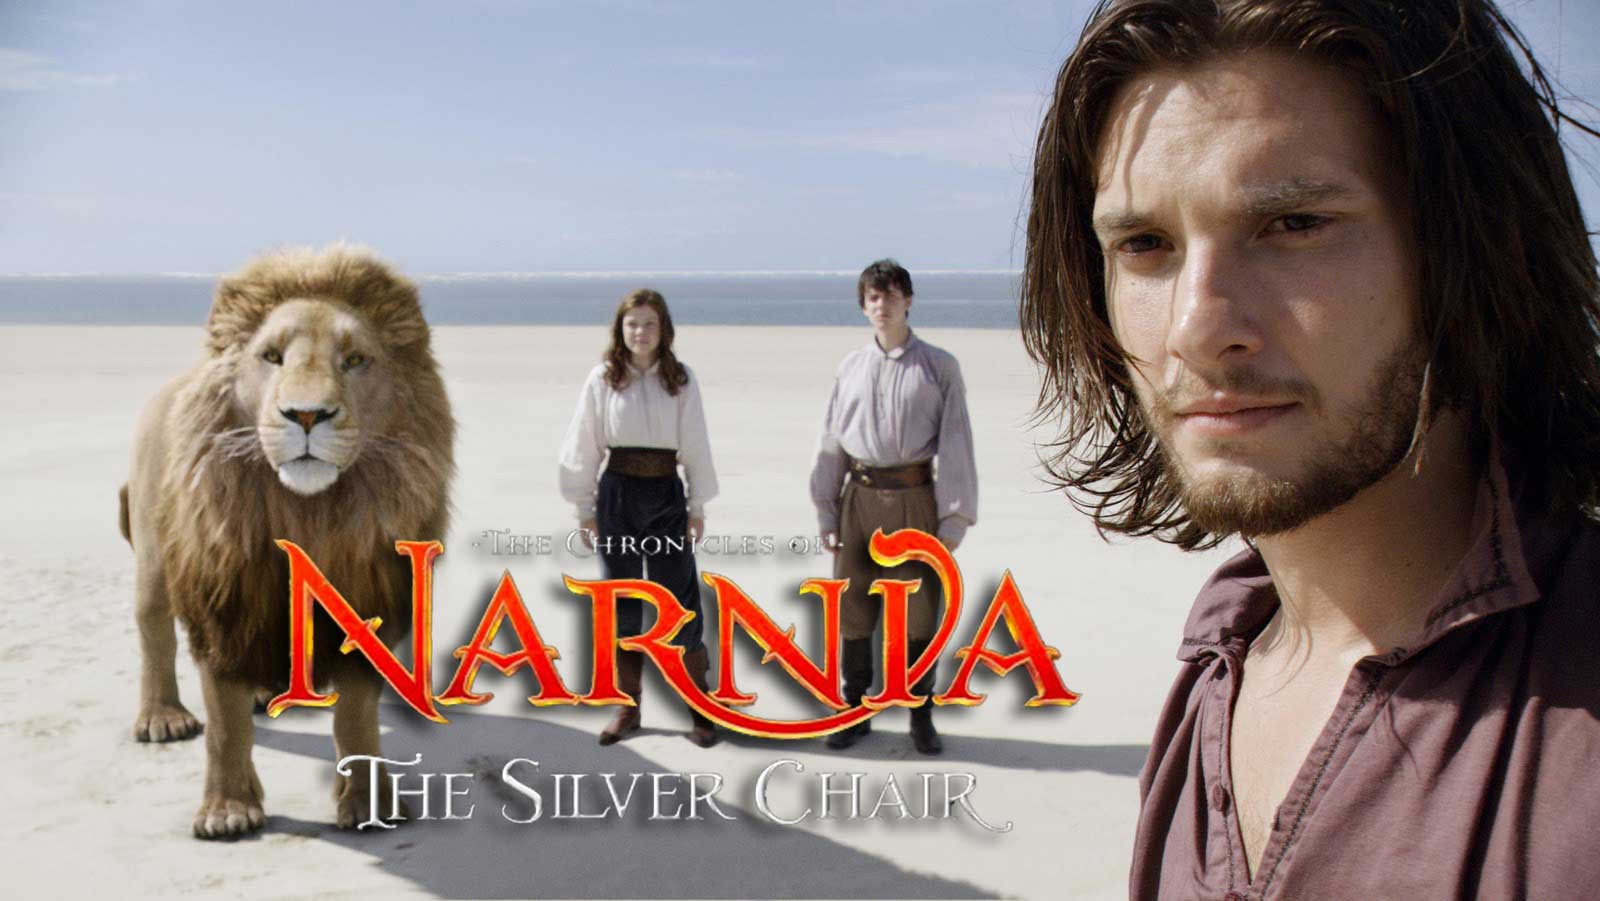 Best ideas about Narnia The Silver Chair
. Save or Pin Chronicles of Narnia to reboot with Silver Chair Sri Now.